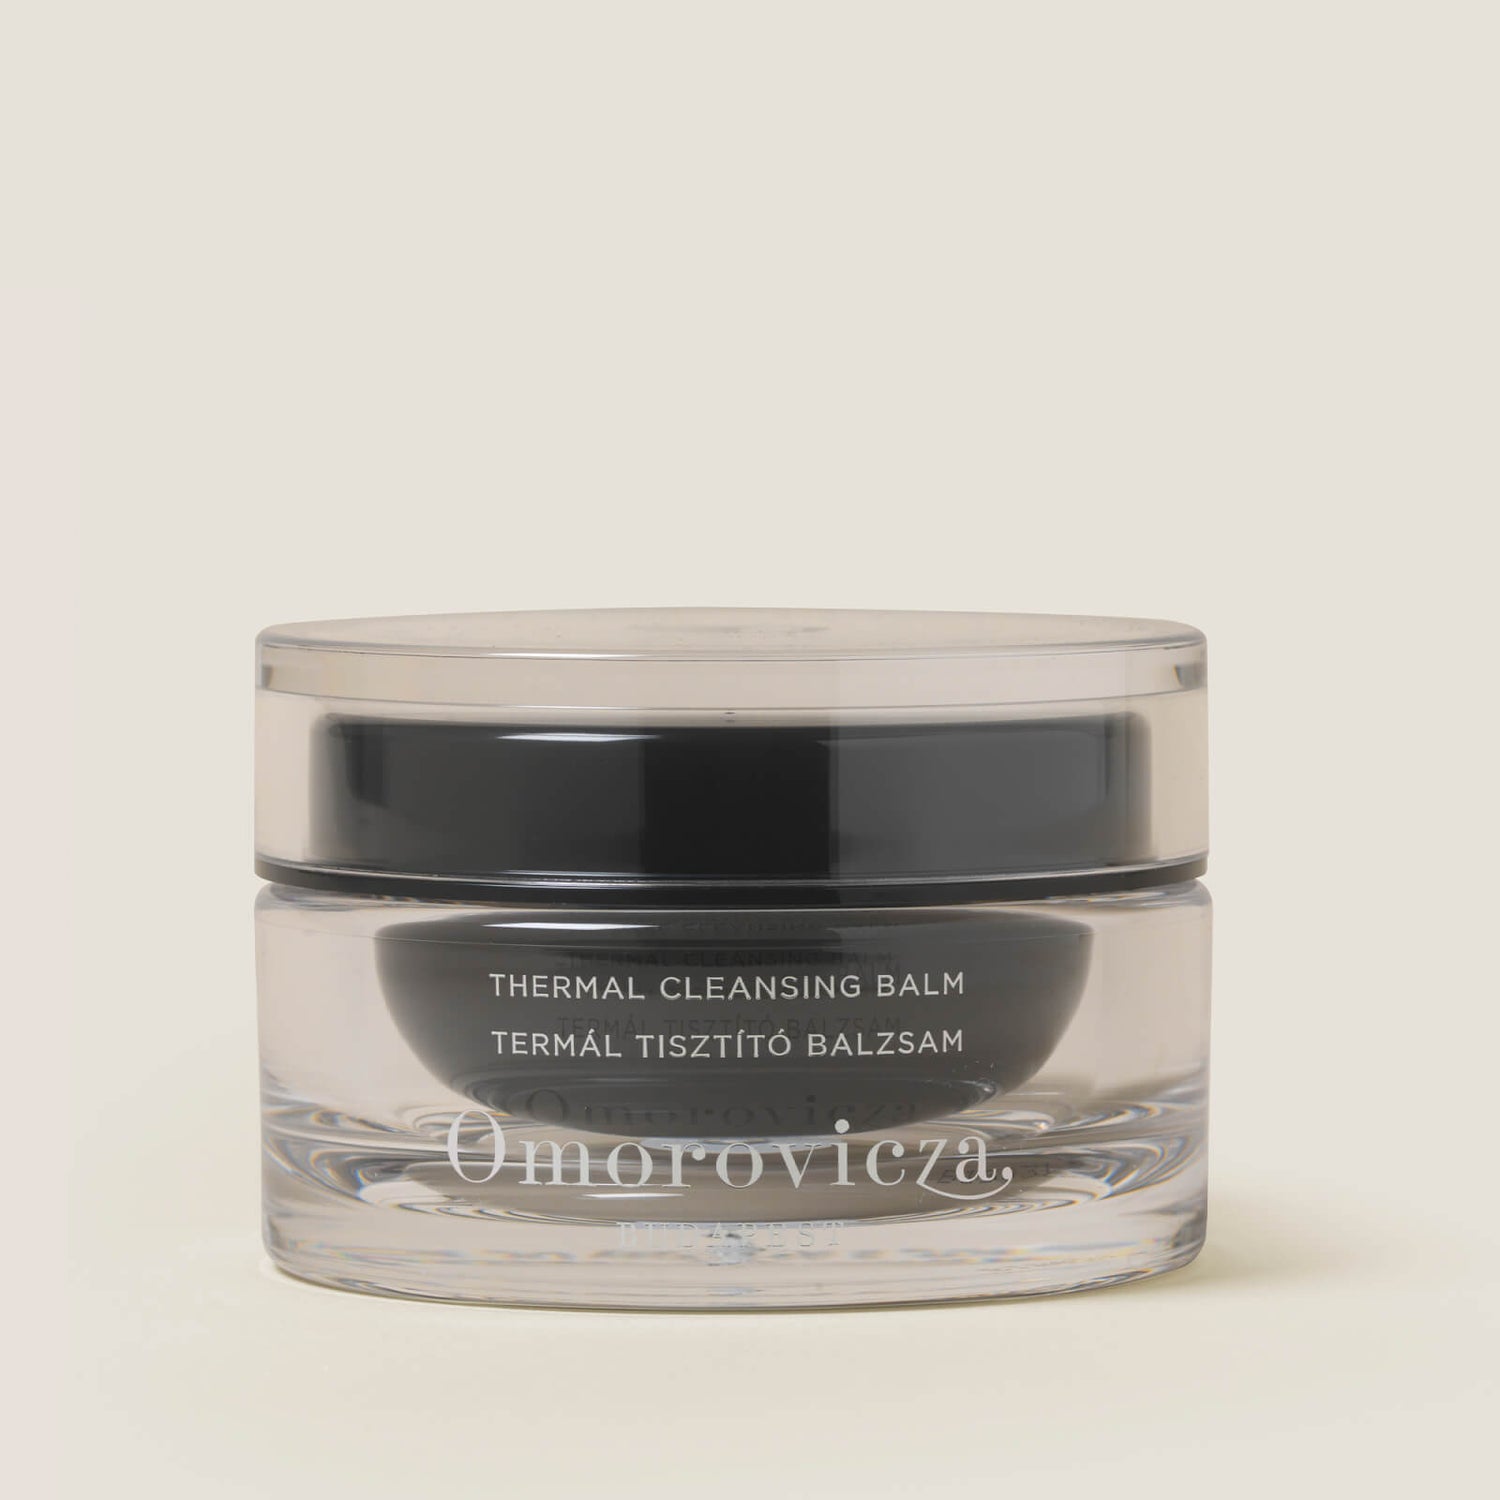 Omorovicza Thermal Cleansing Balm.